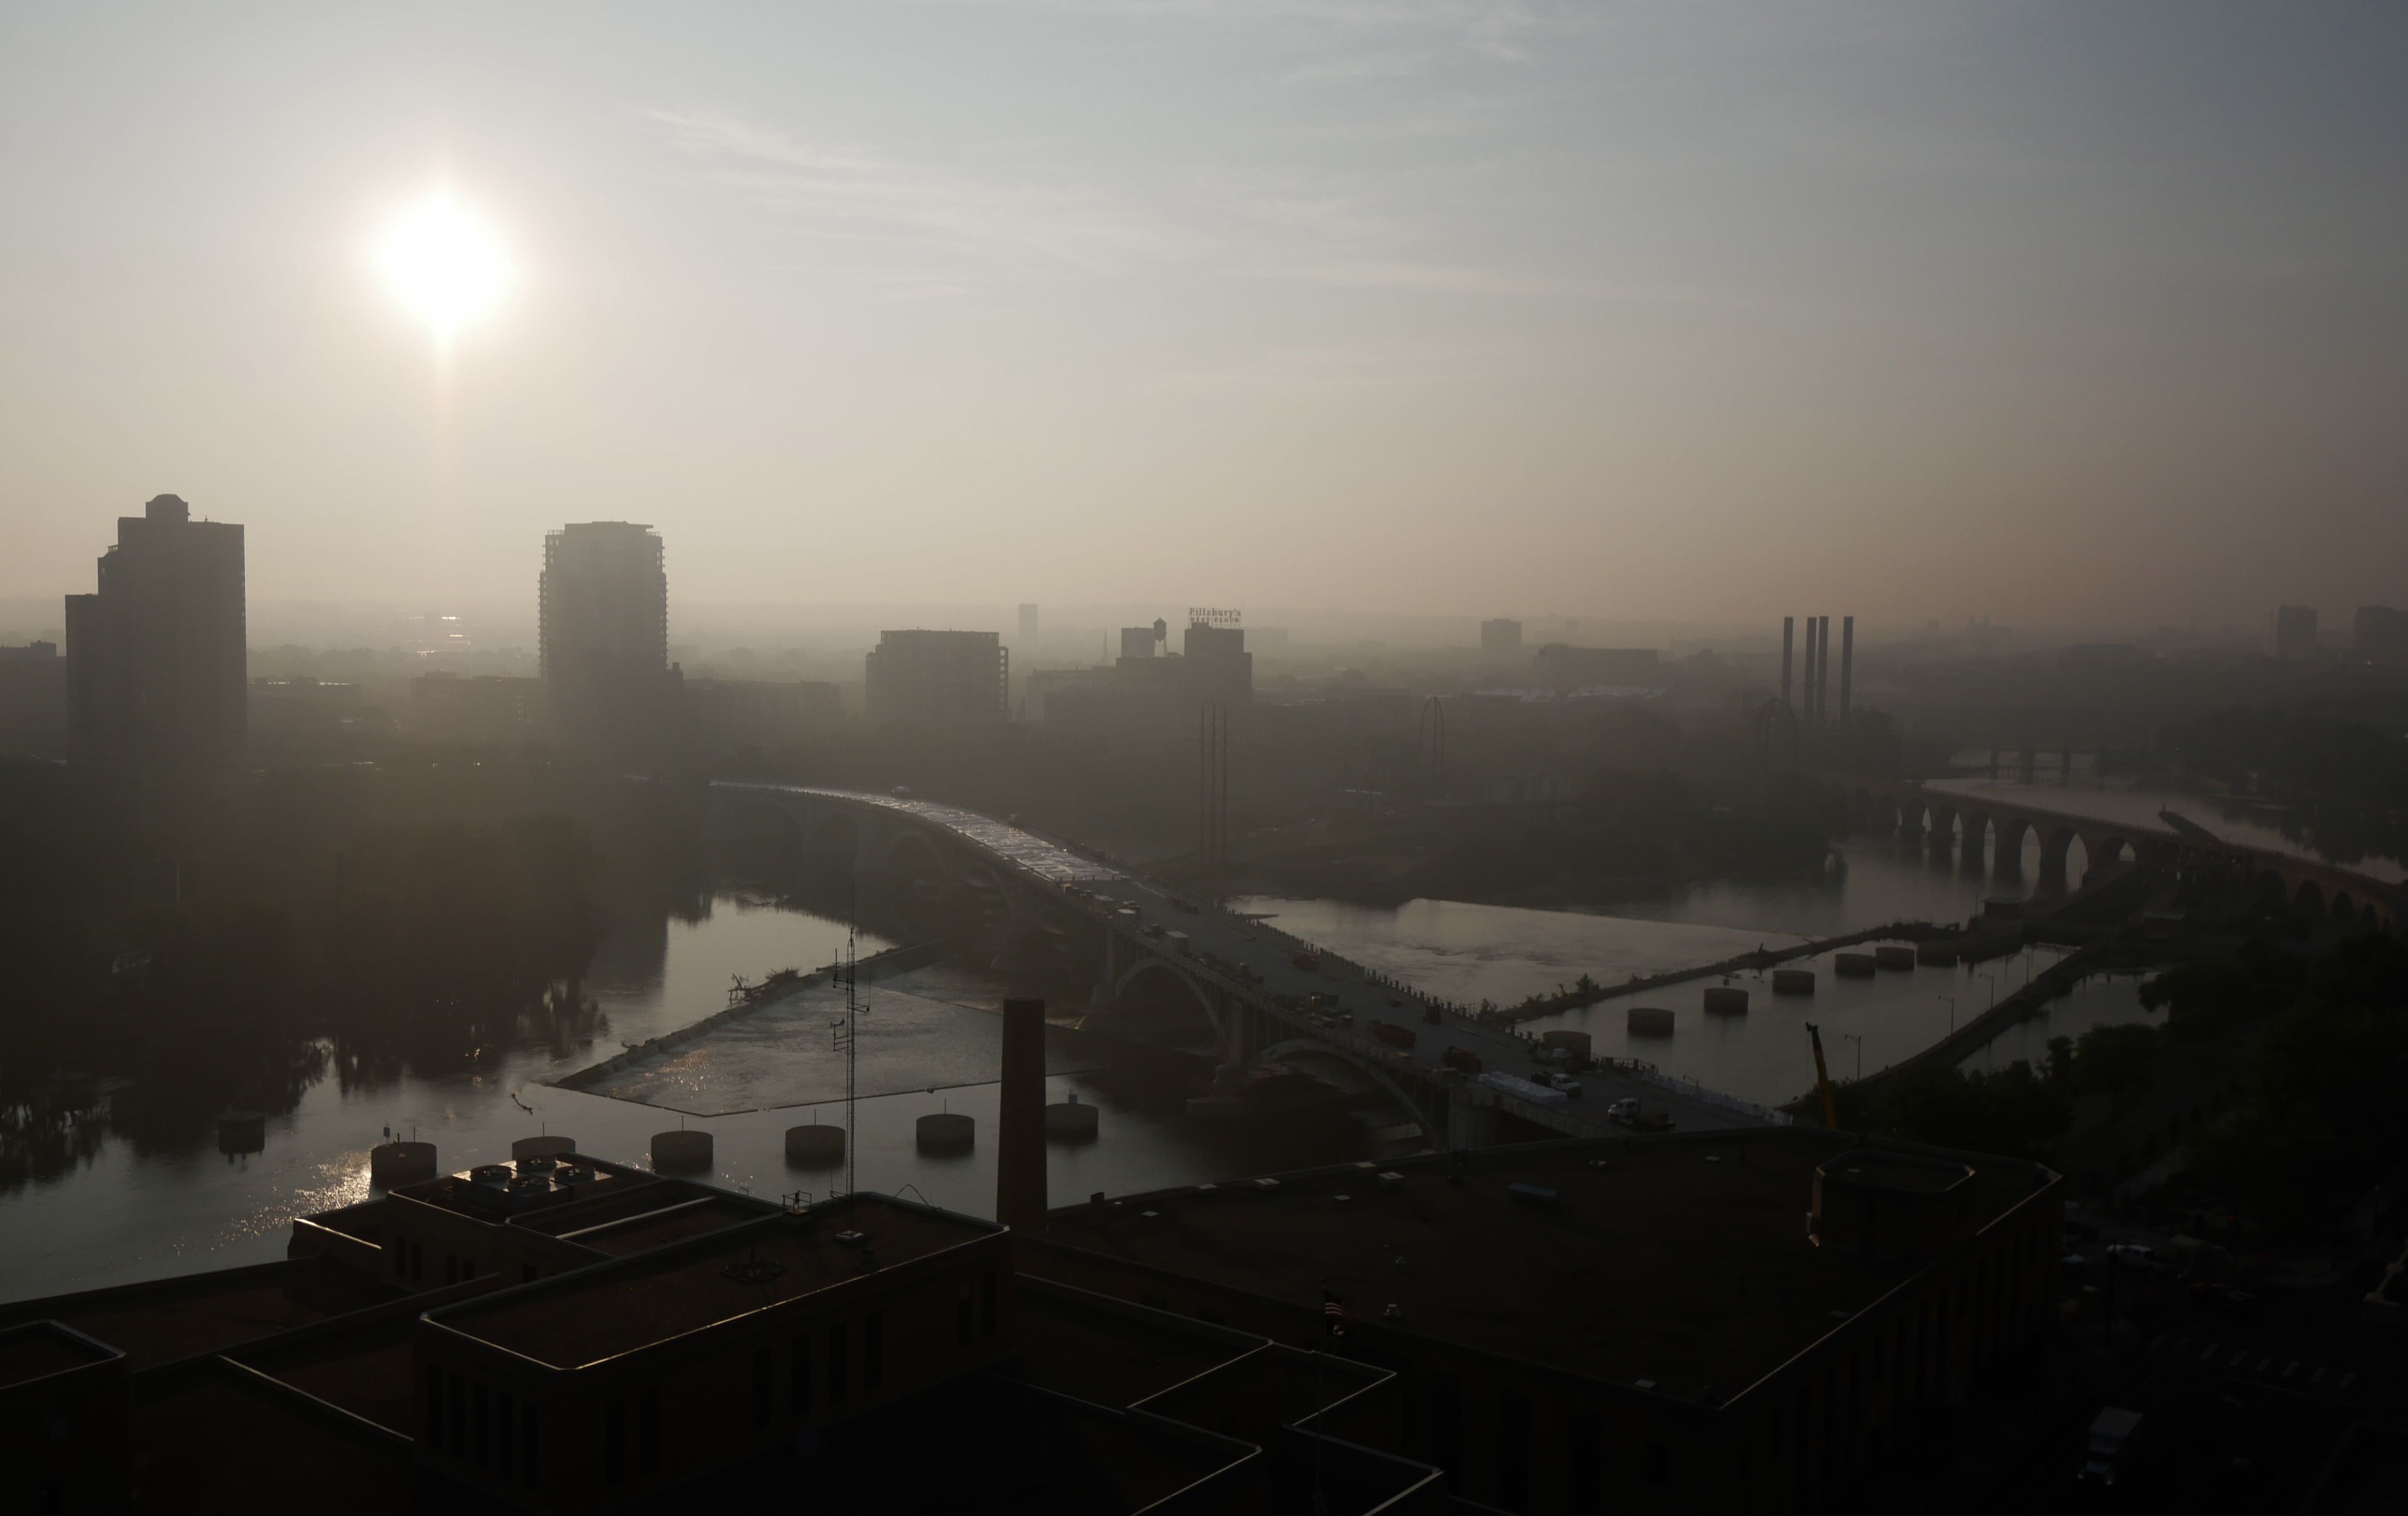 Due to the continued affects of the Canadian wildfires, it was another hazy morning in the Twin Cities on Thursday, June 29, 2023. This is looking down the Mississippi River, from Minneapolis towards St. Paul. Canada wildfire smoke affecting Minnesota air quality.